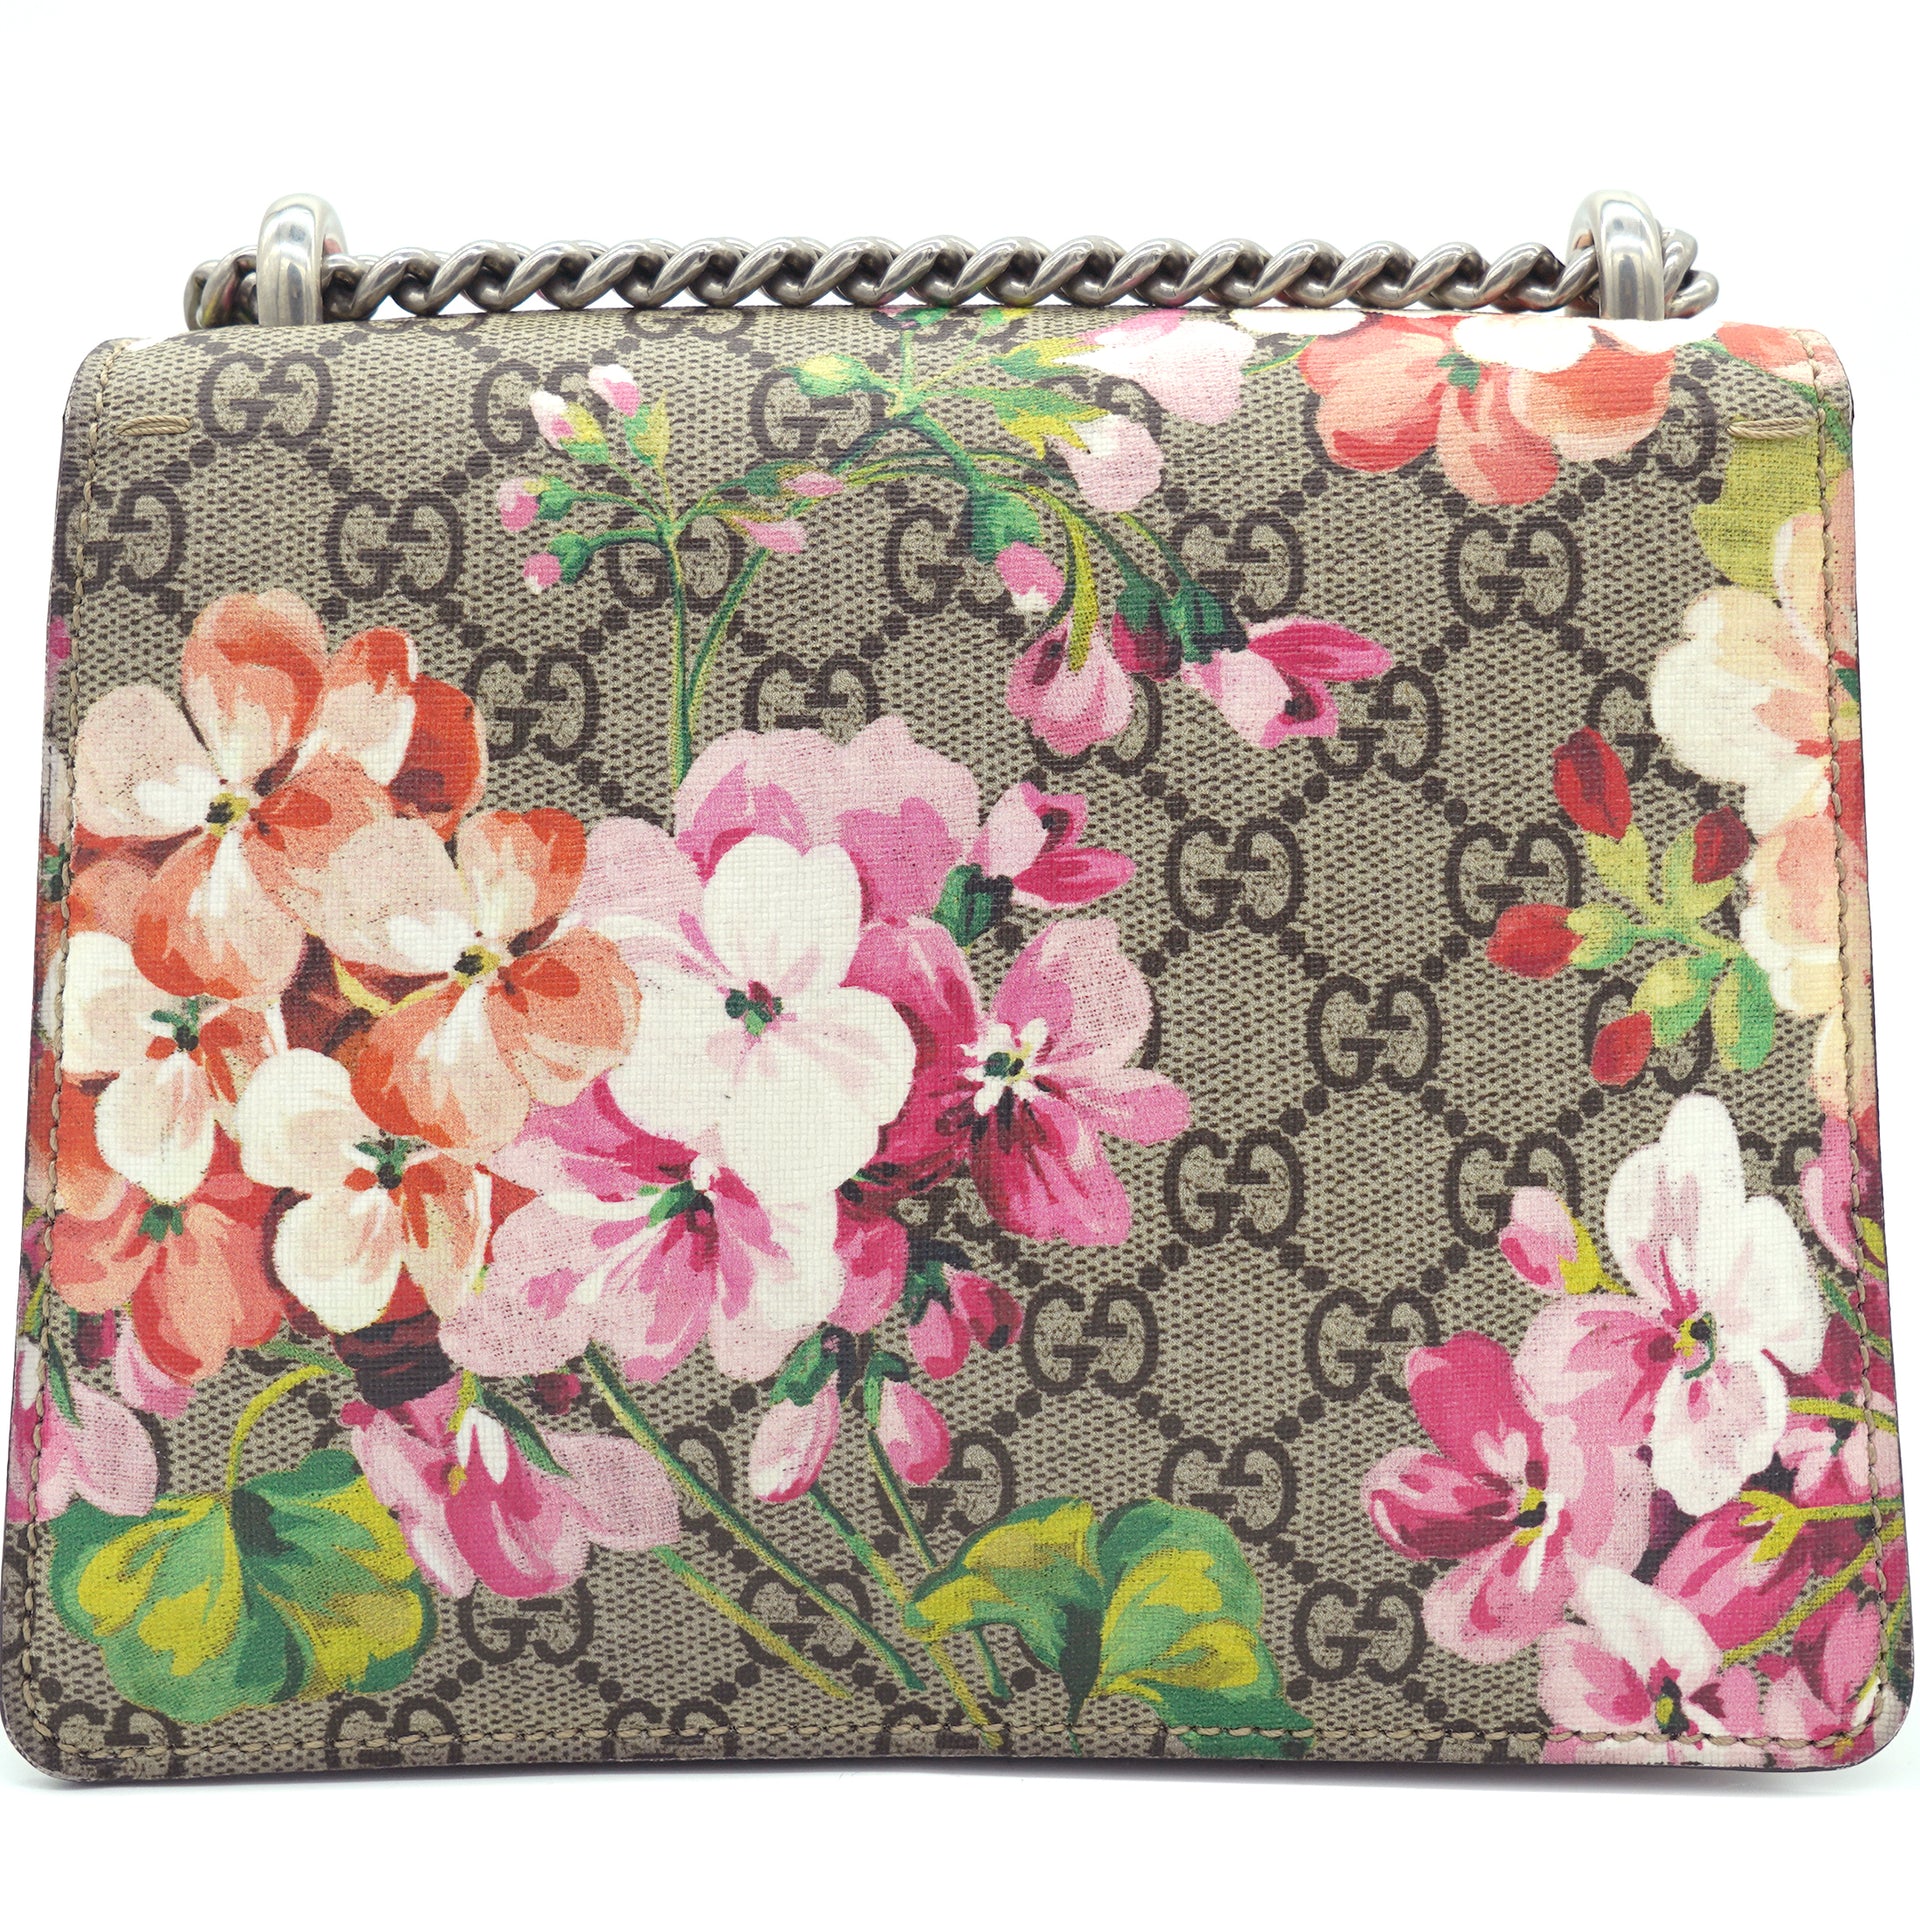 Gucci GG Supreme Guccissima Pink Blooms Print Floral Leather Clutch Pouch  Bag